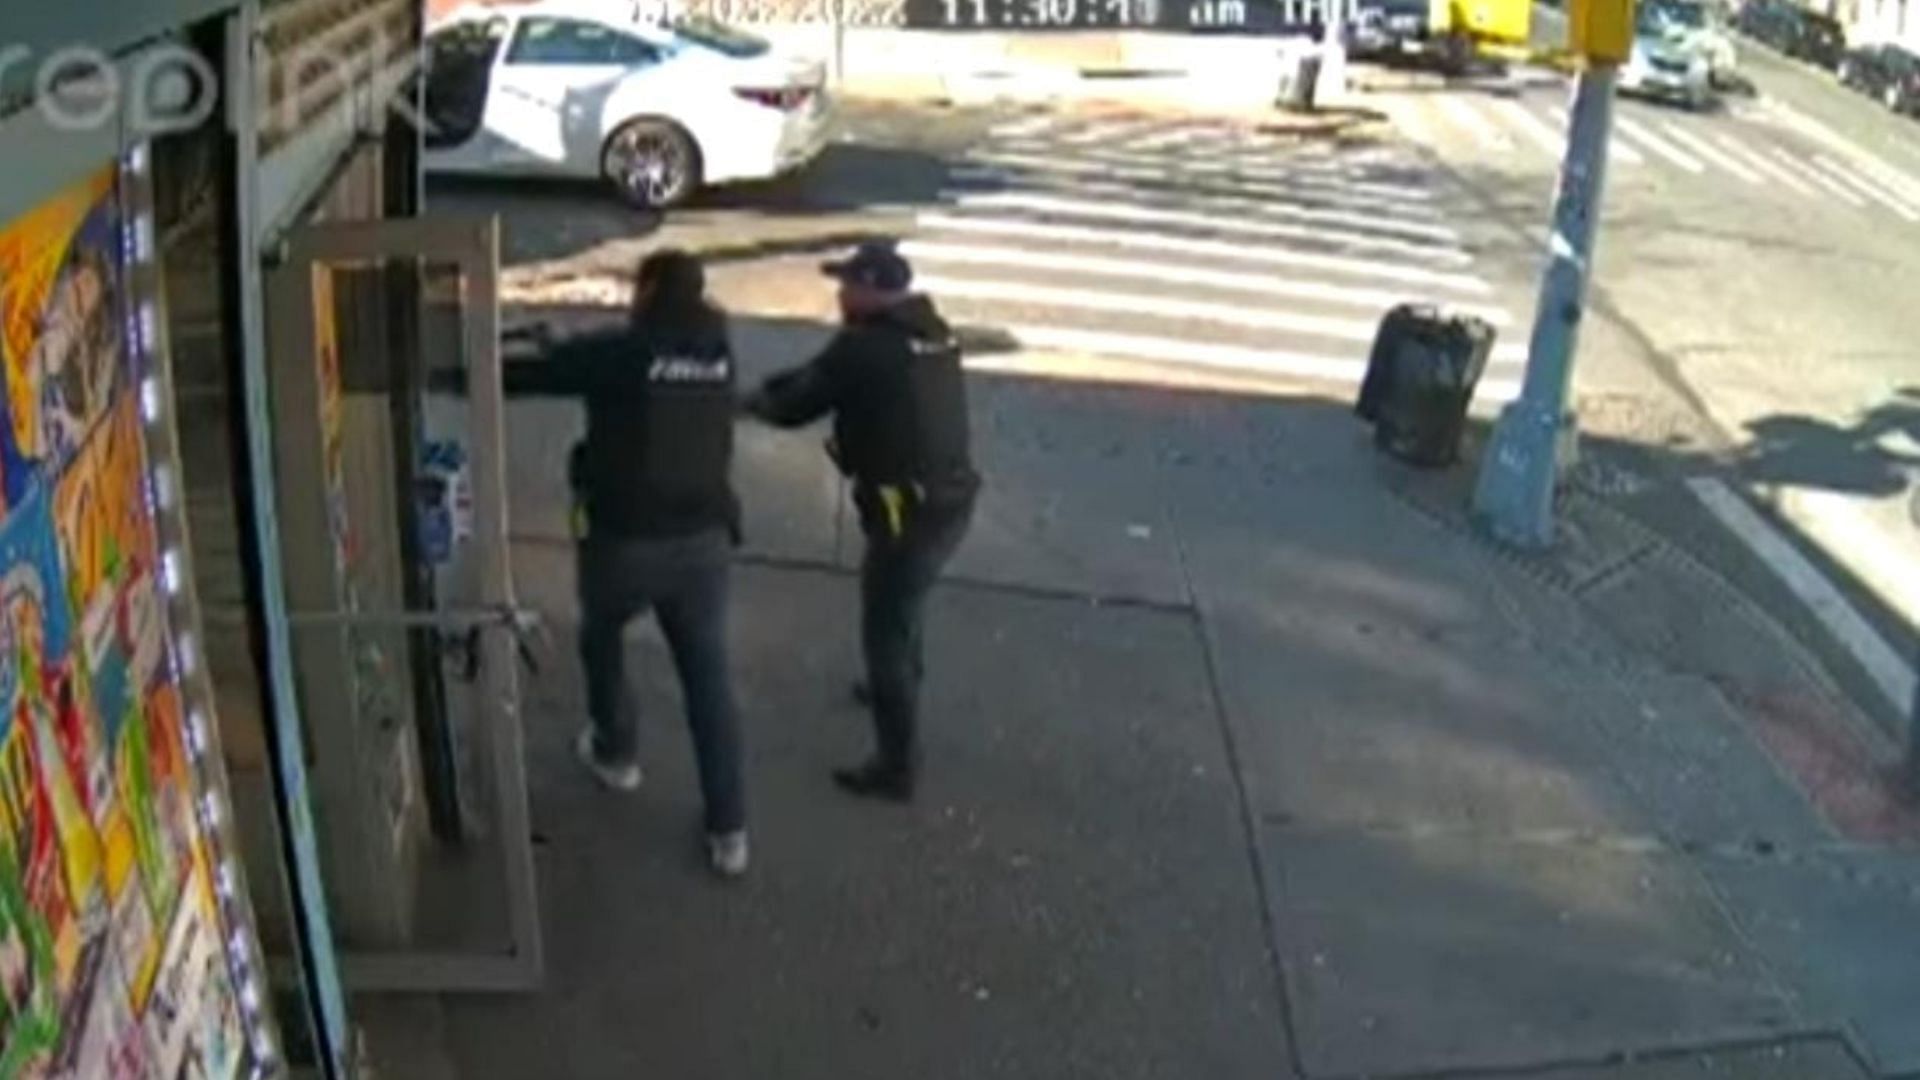 A man involved in a bodega stabbing in the Bronx was fatally shot by NYPD officers (Image via surveillance camera footage)